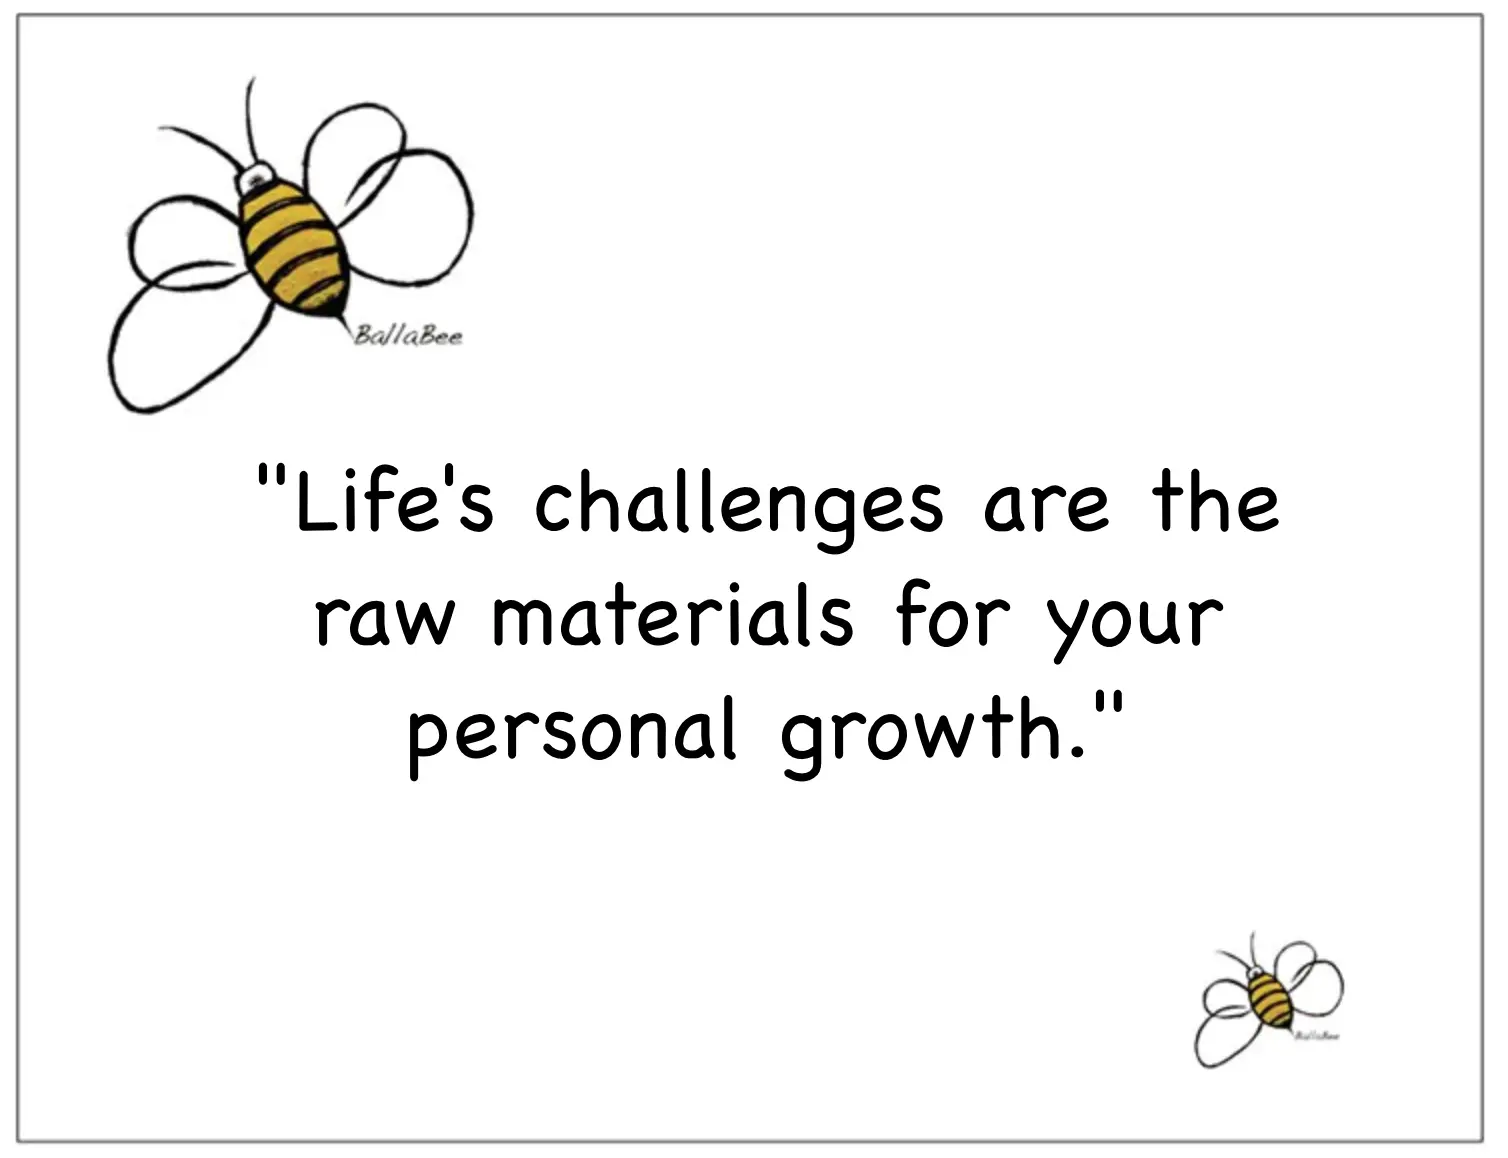 Life's challenges are the raw materials for your personal growth